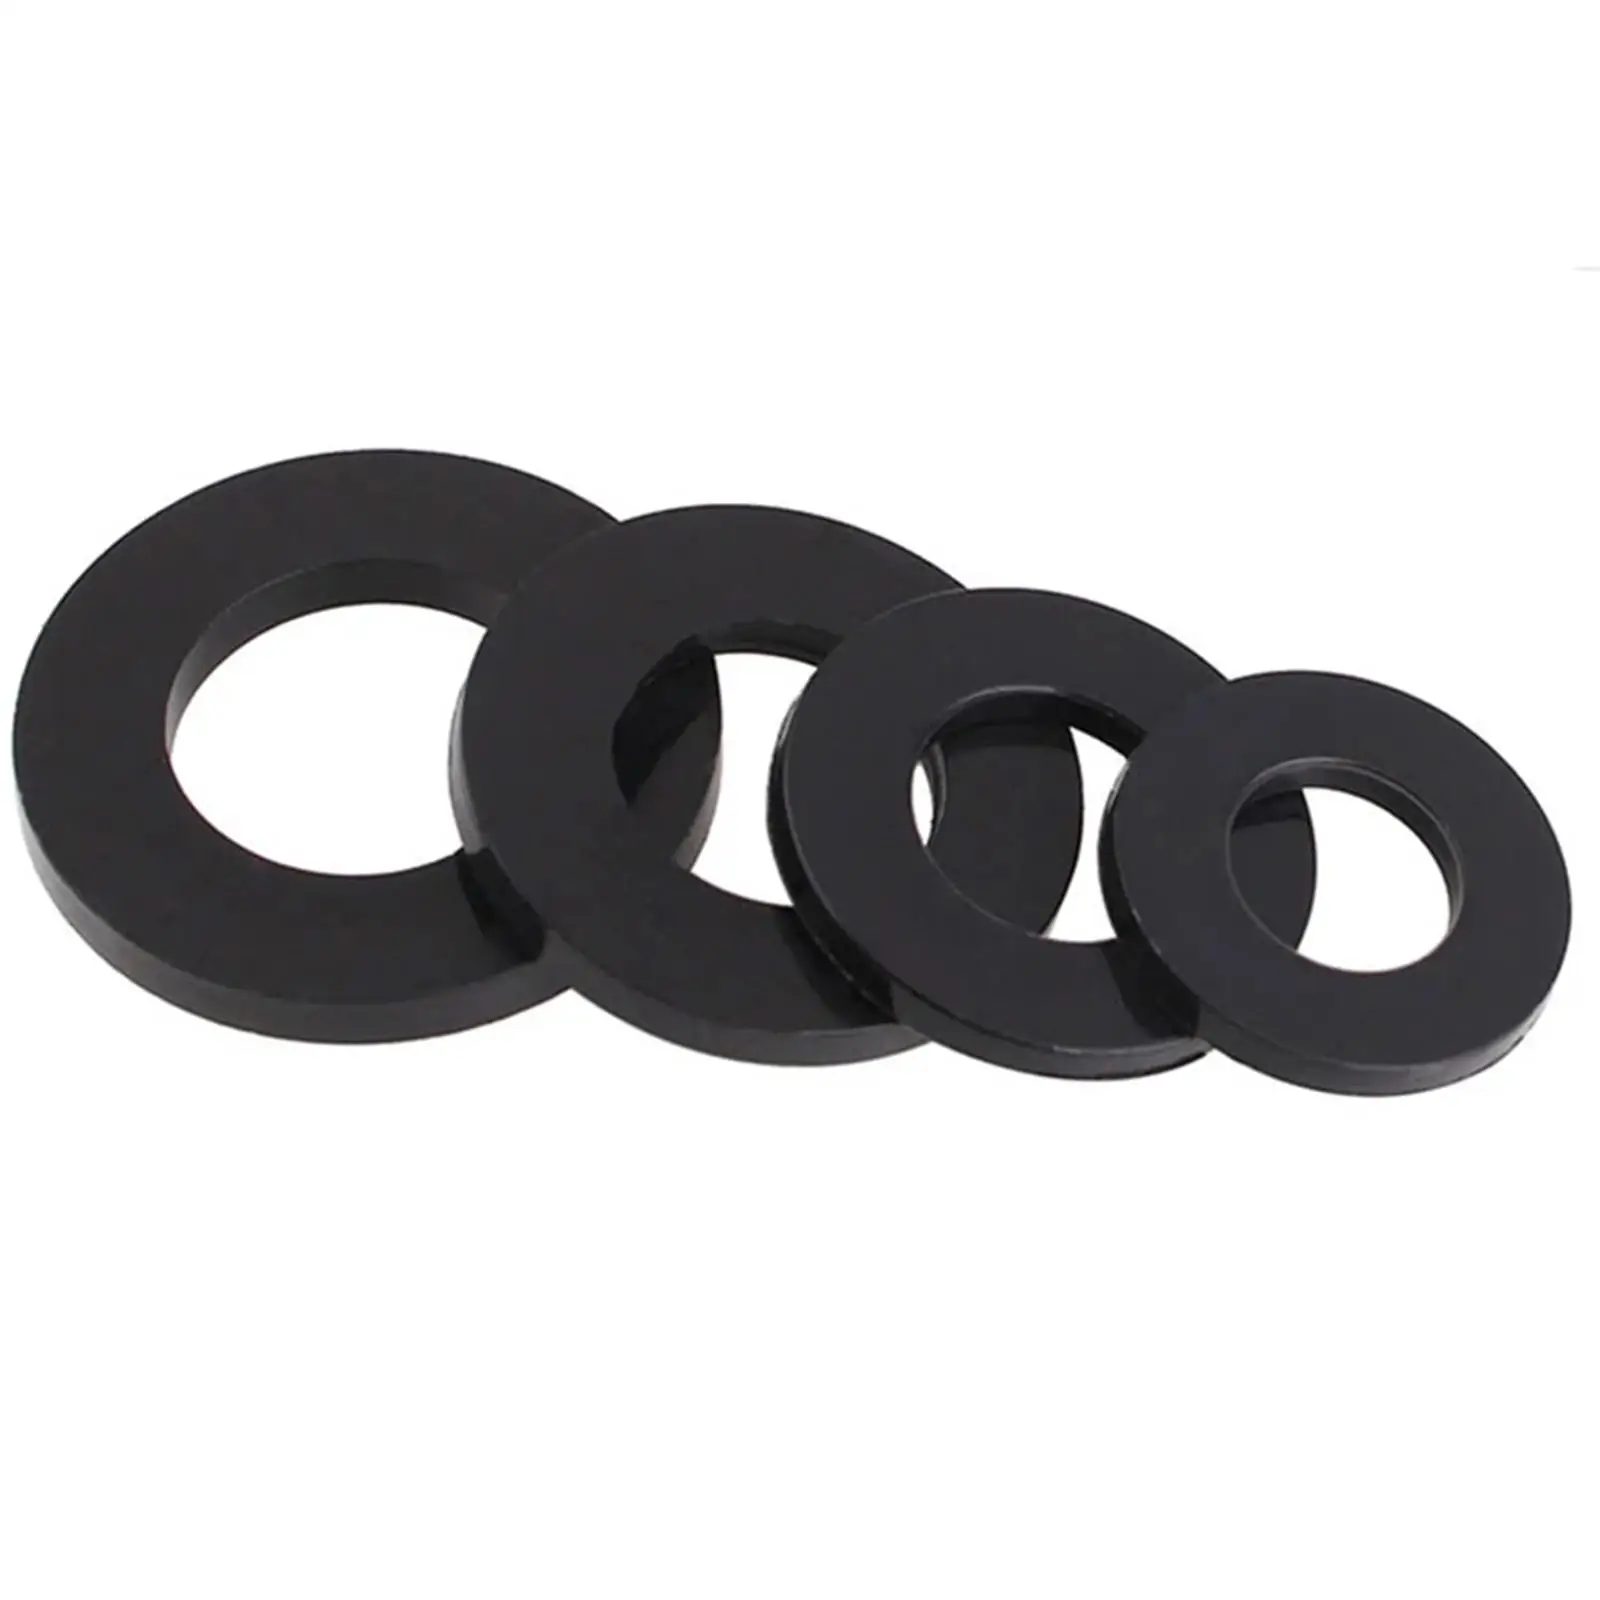 500Pcs Nylon Washer Spacers 8 Sizes with Box Insulation flat Assorted Flat Washers Set for Household Commerical Use